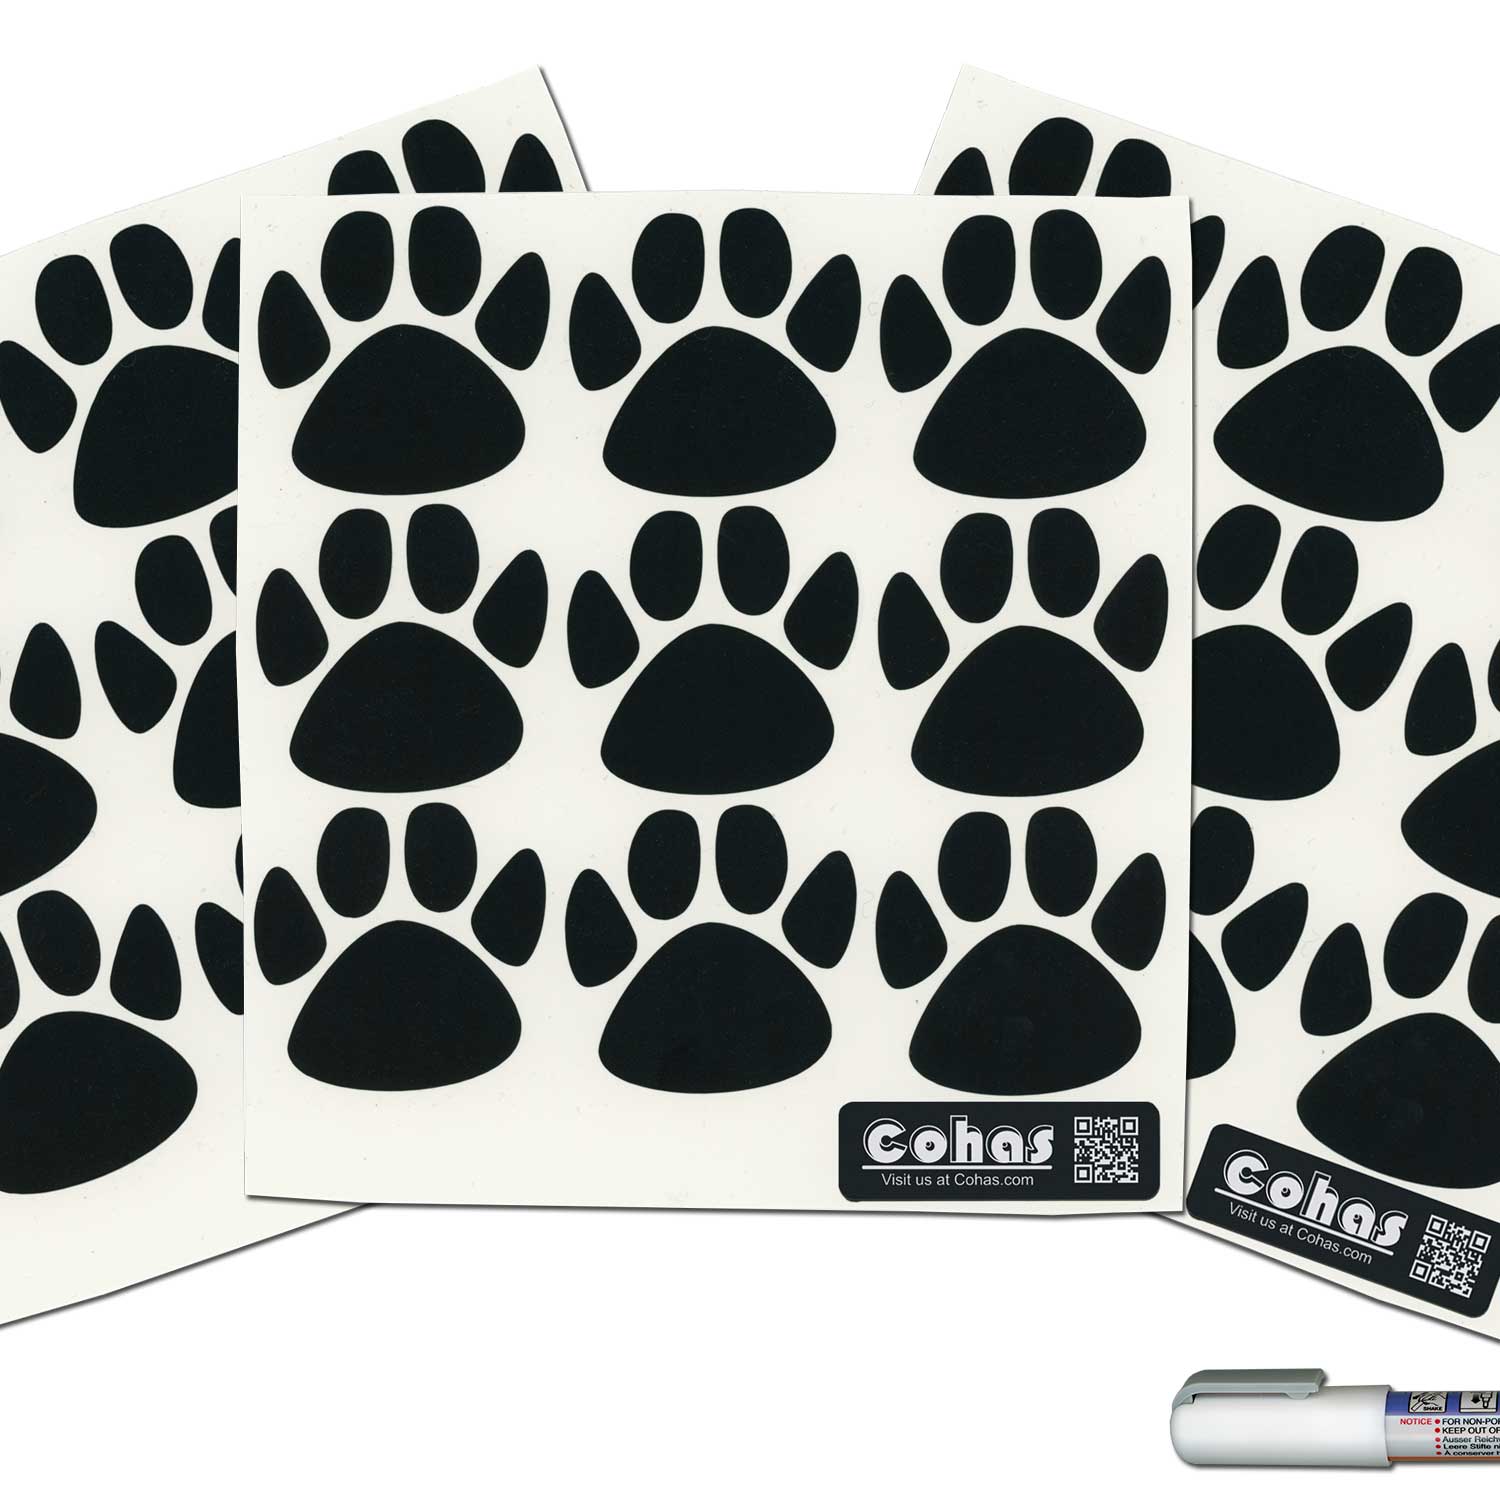 Cohas Small Paw prints with a 1mm white marker